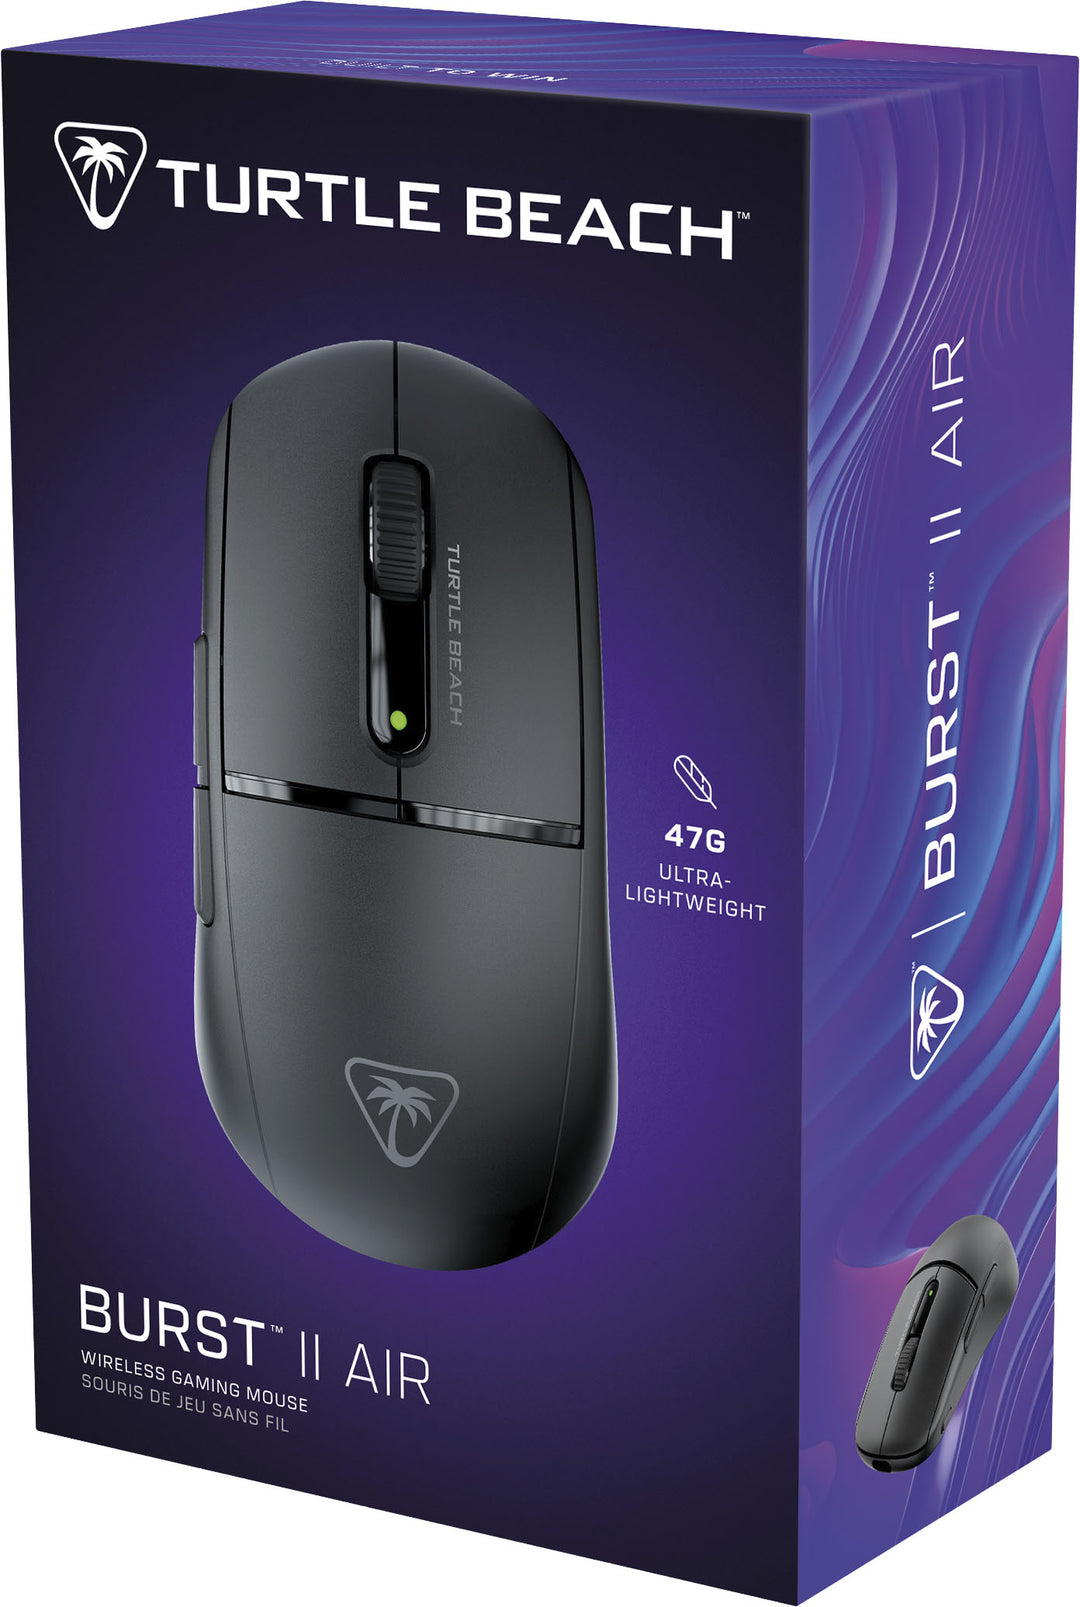 Turtle Beach - Burst II Air Ultra Lightweight Wireless Symmetrical Gaming Mouse with Bluetooth & 120-hour battery - Black_7